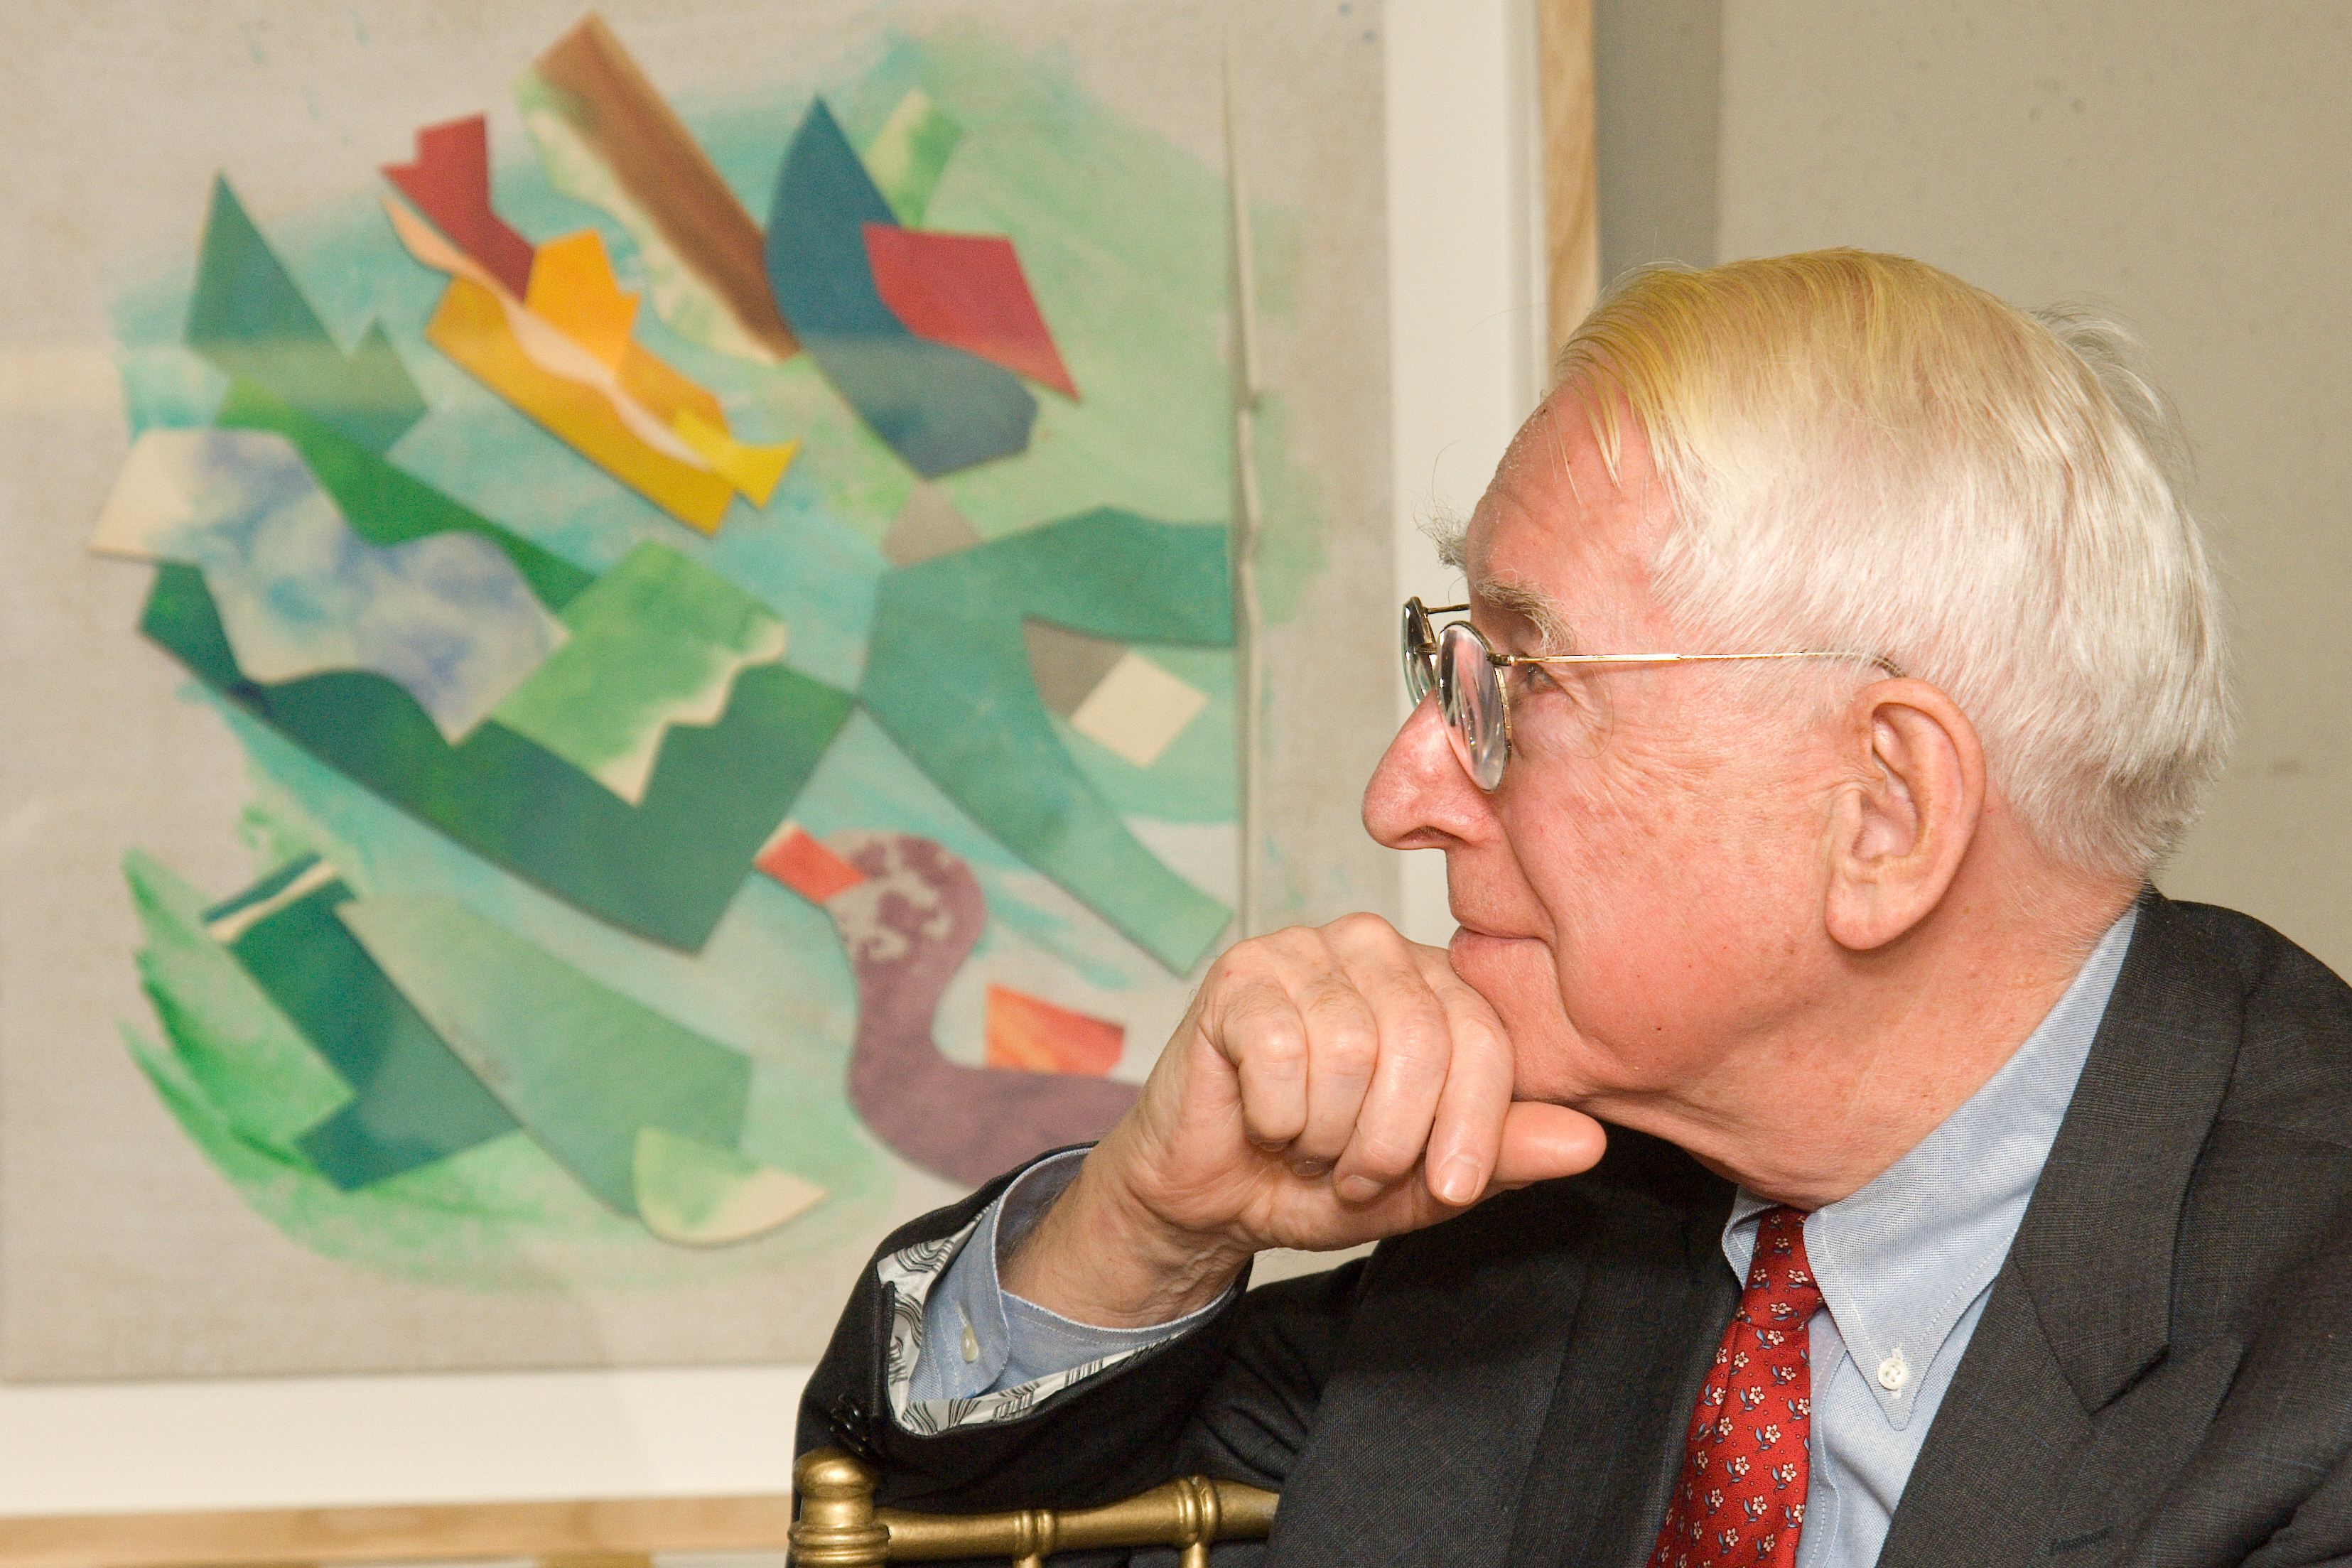 Dr. Brady in 2007 at the fifth anniversary celebration of the endowment of the Luther W. Brady Art Gallery, shown in front of a work by Sam Maitin, one of the artists included in the estate collection.